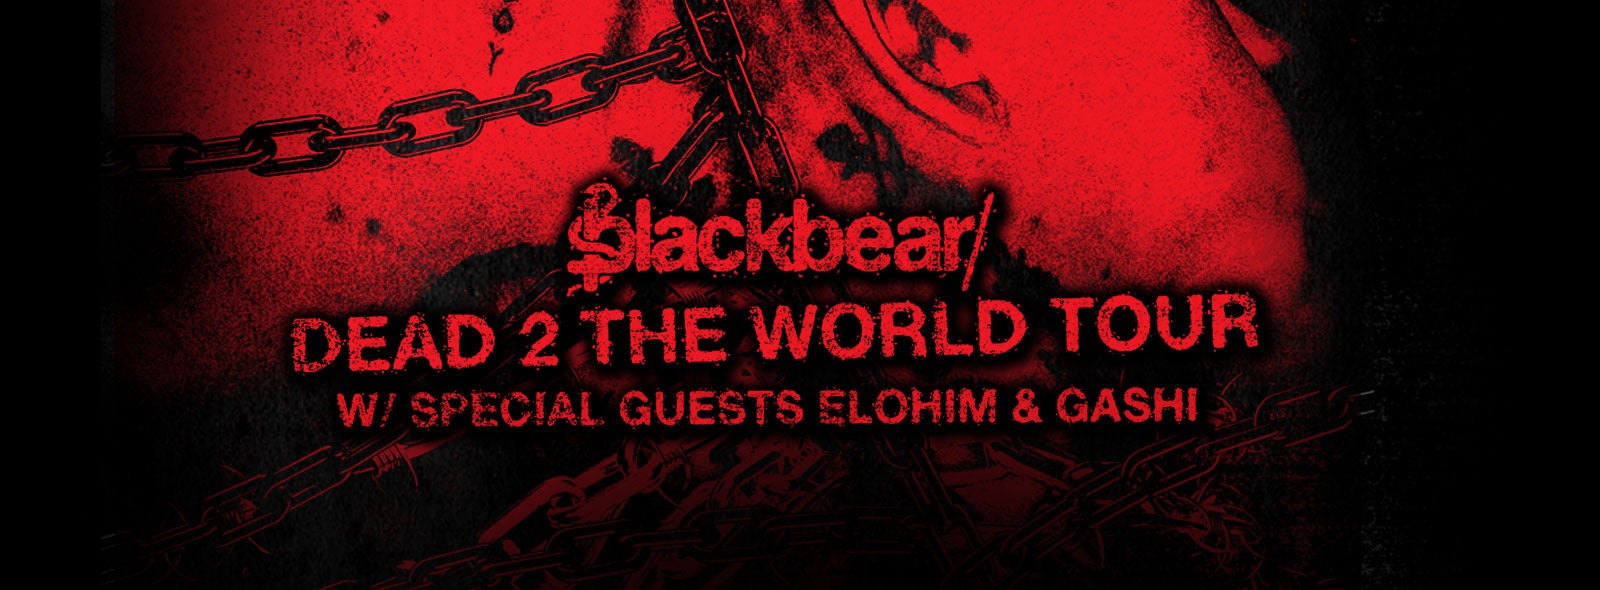 Blackbear Comes To Dpac June 2 2019 Dpac Official Site